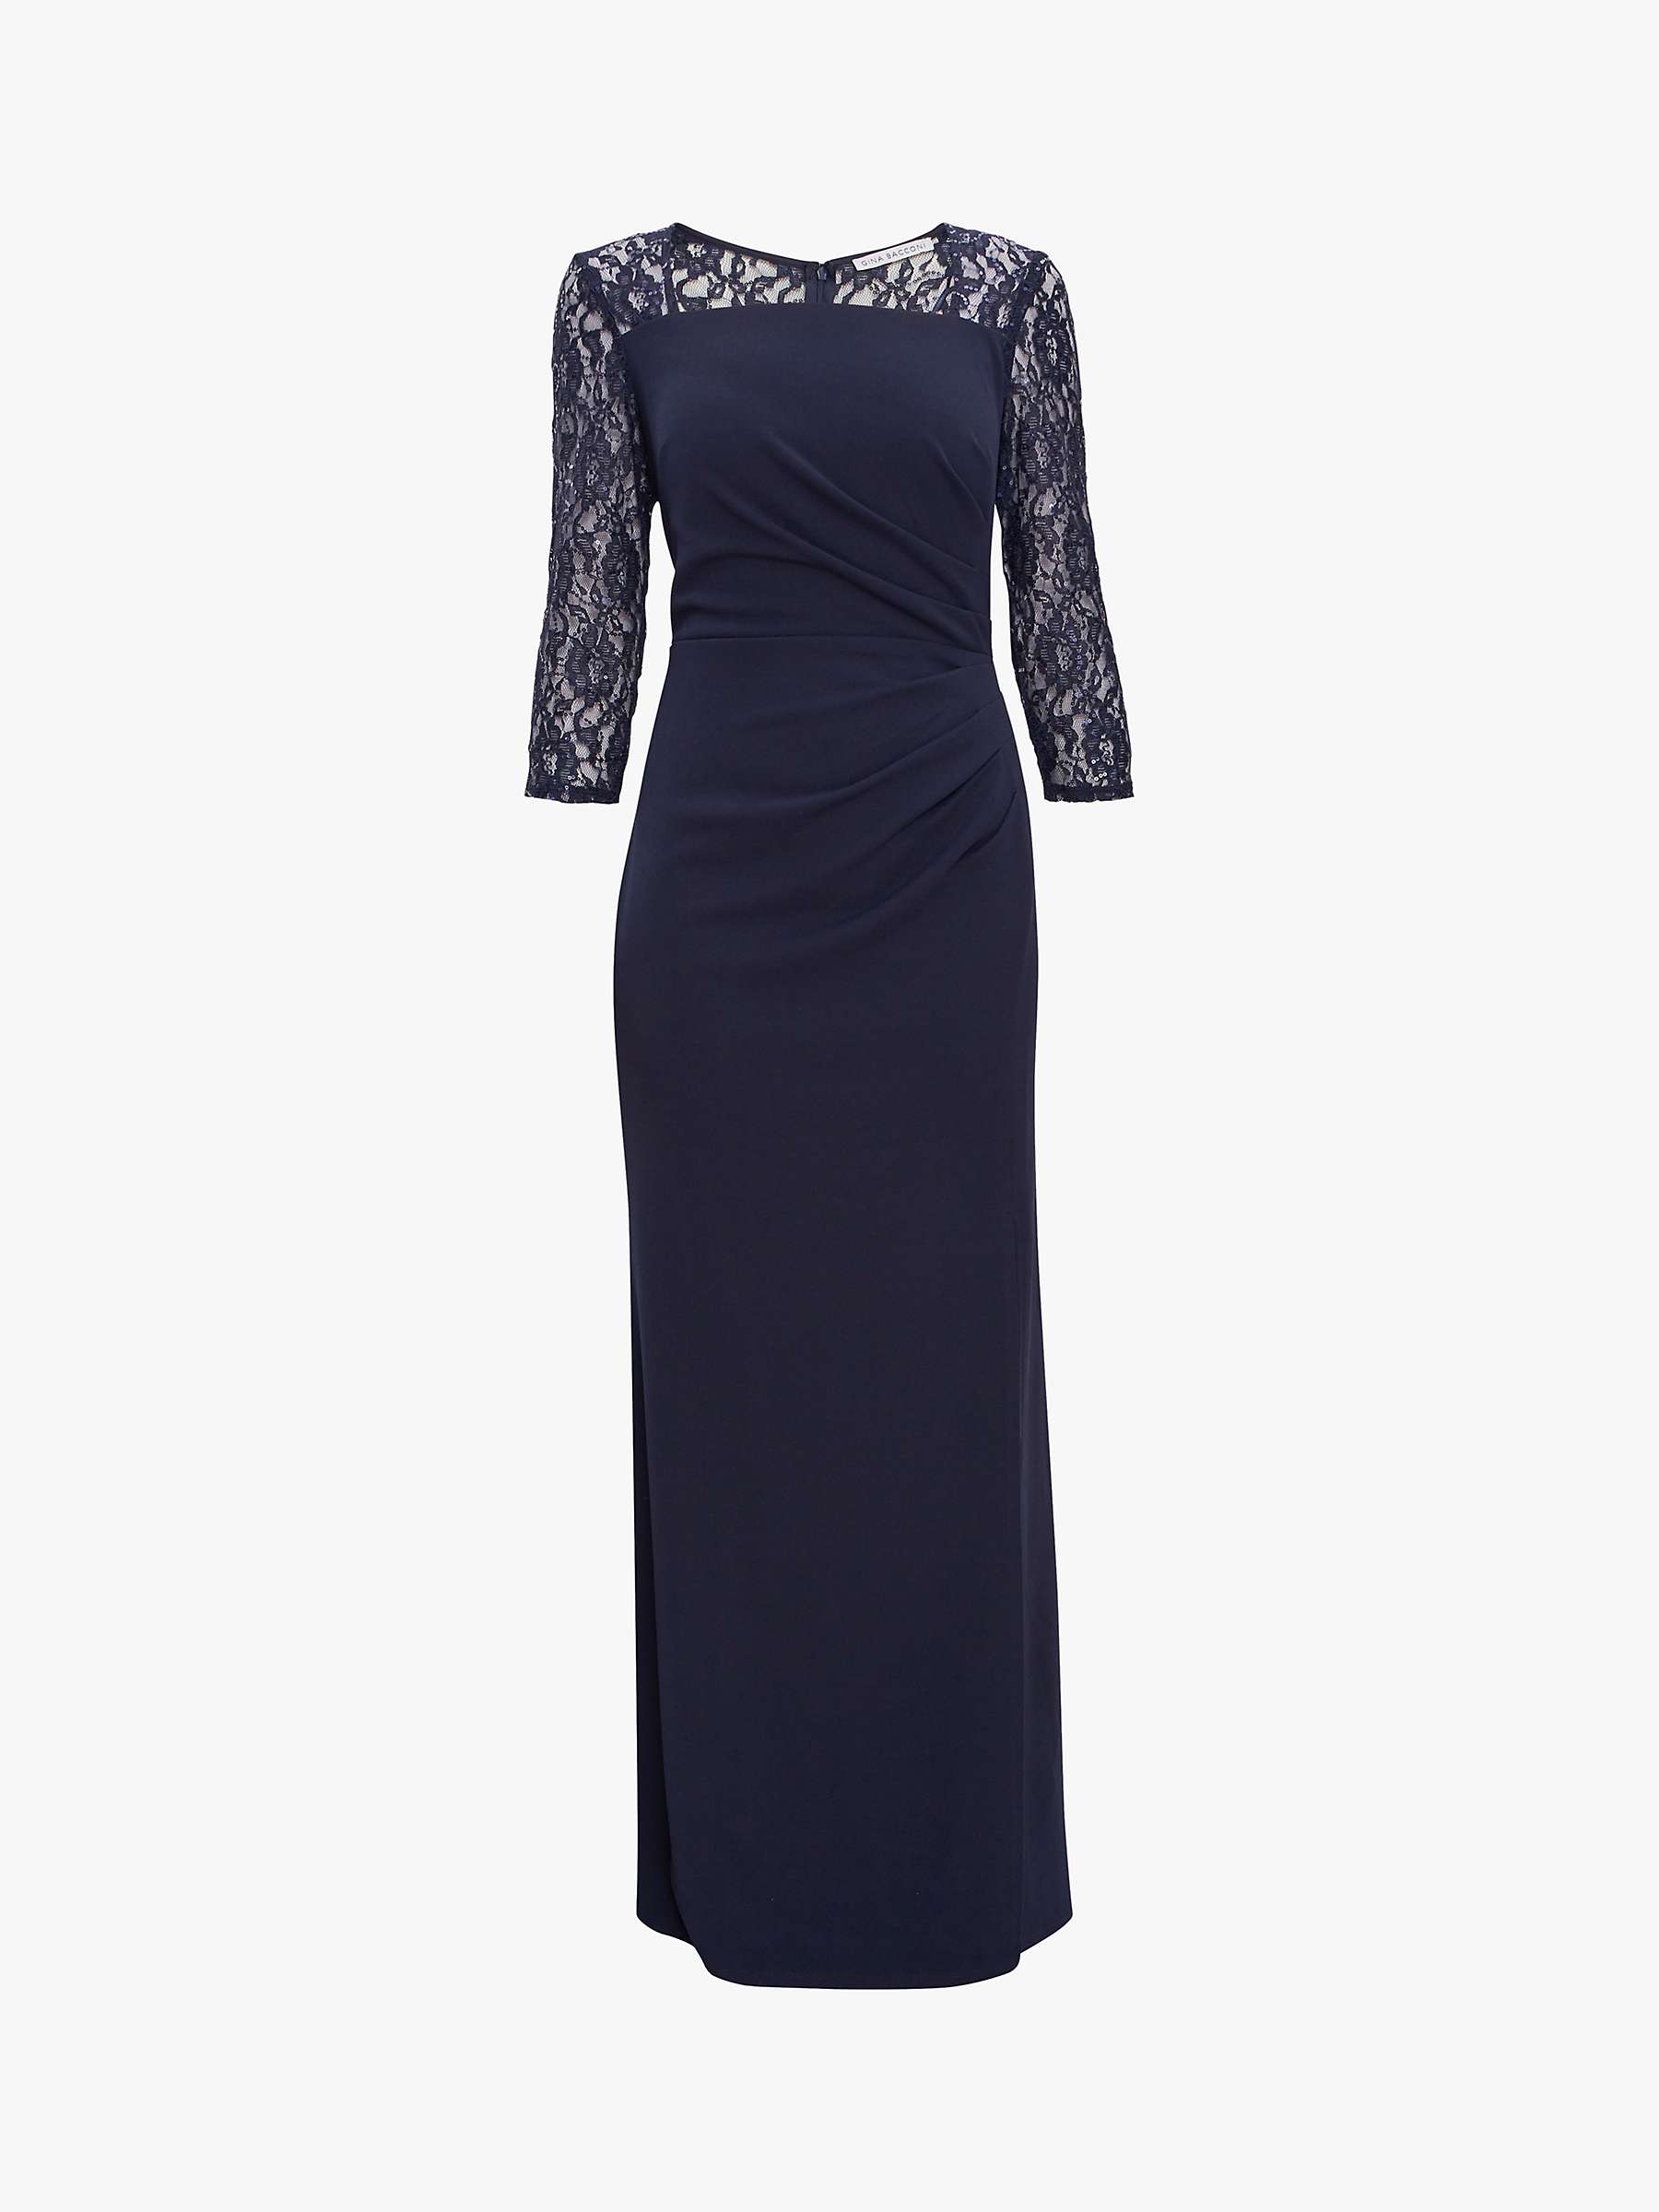 Buy Gina Bacconi Una Floral Lace Sleeve Maxi Dress, Navy Online at johnlewis.com